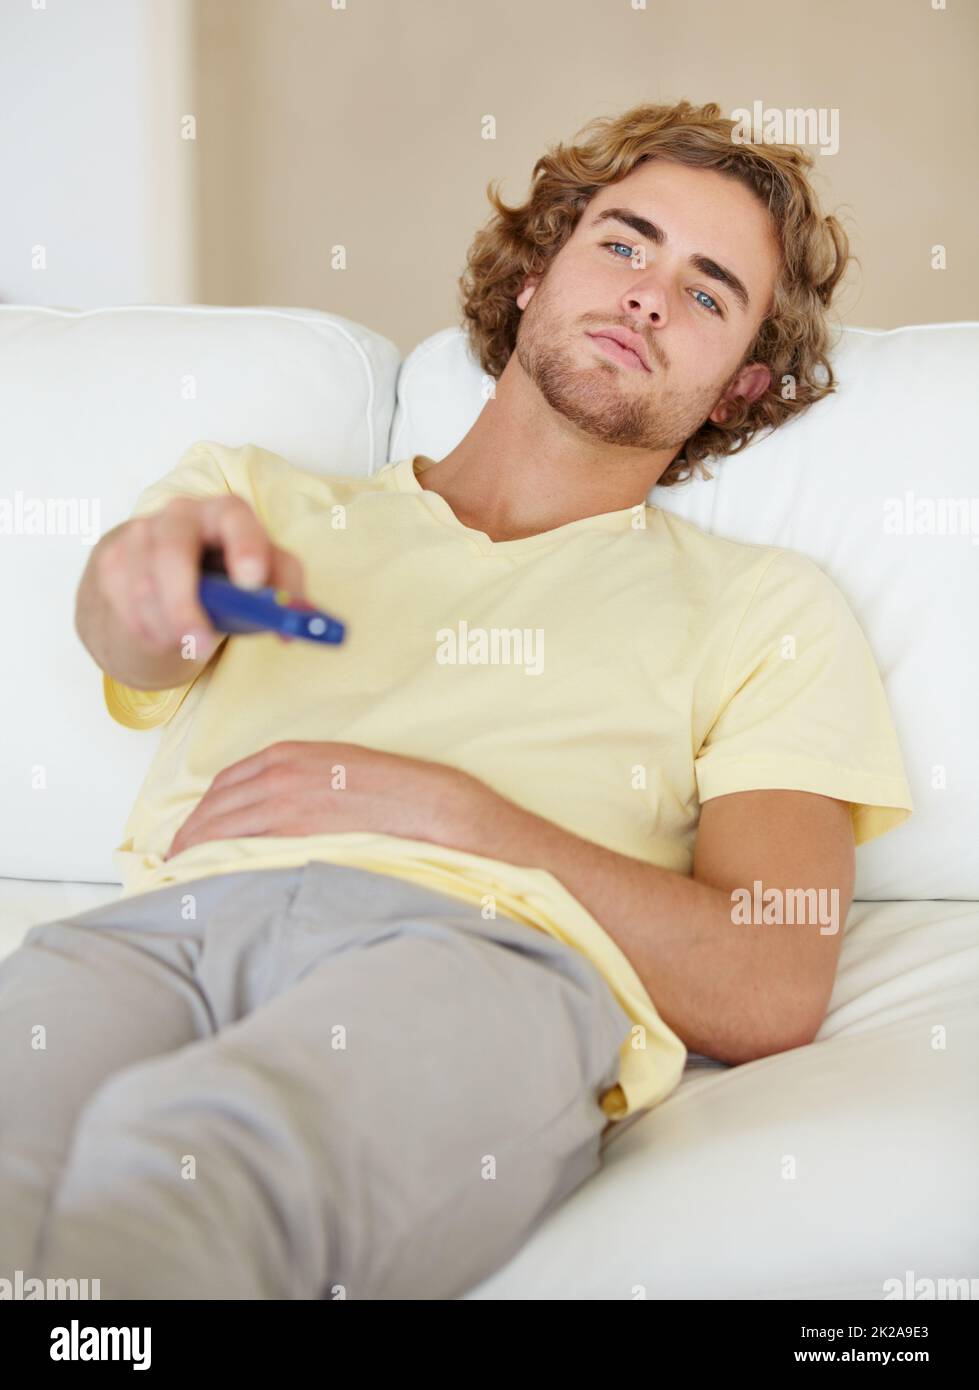 Chilling. A lazy young man flicking through TV channels. Stock Photo